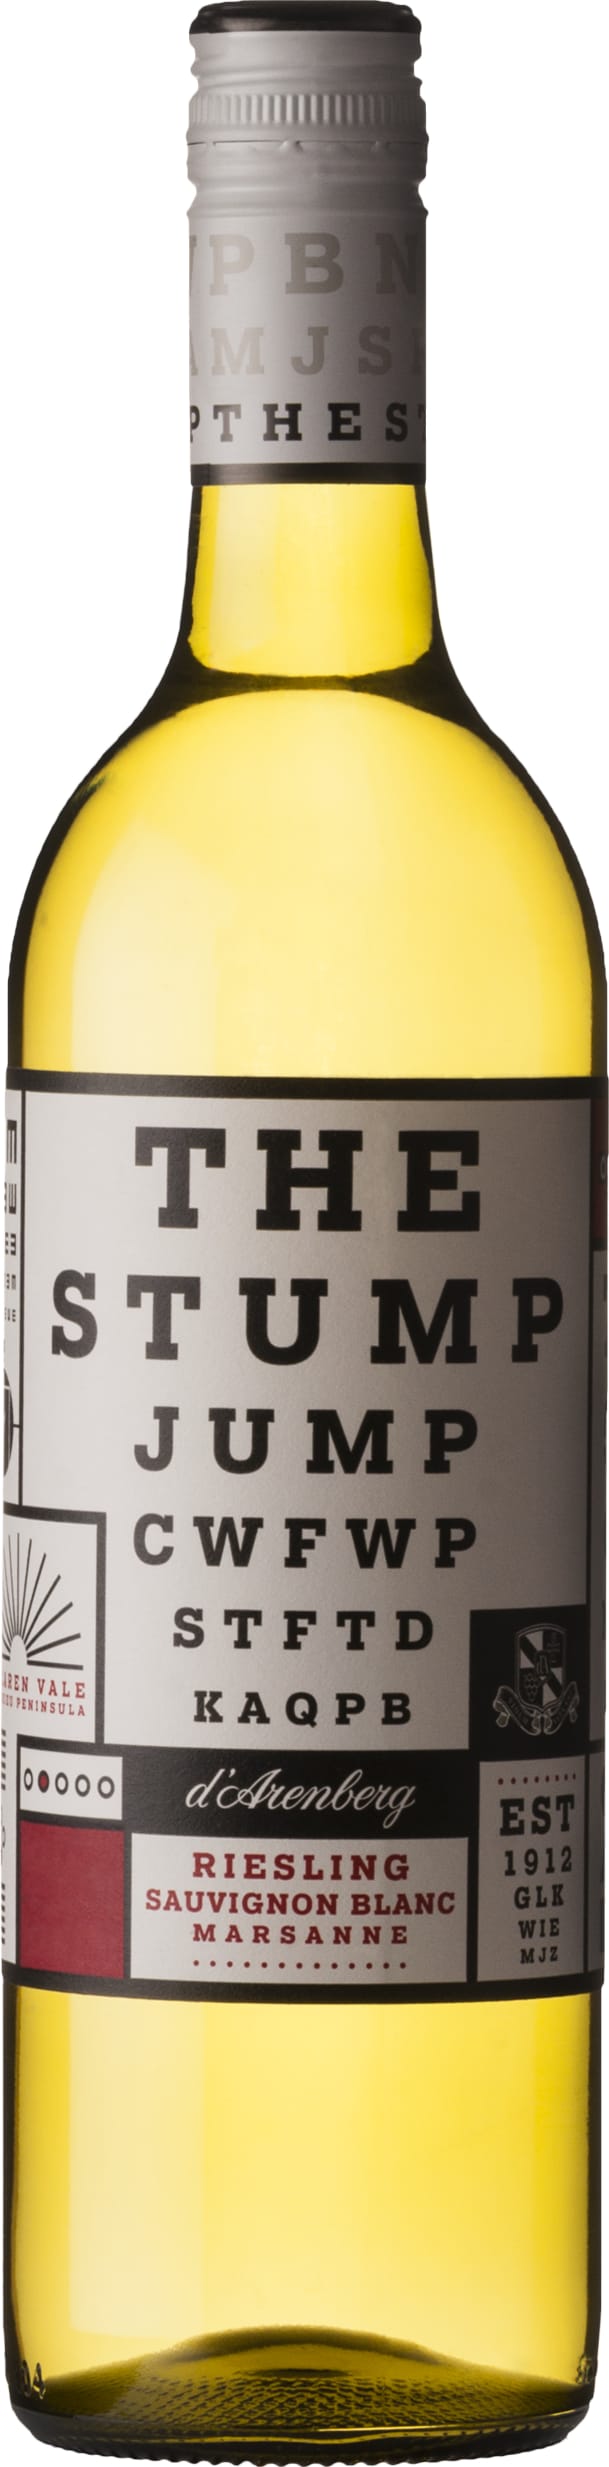 D Arenberg The Stump Jump White Blend 2021 75cl - Buy D Arenberg Wines from GREAT WINES DIRECT wine shop